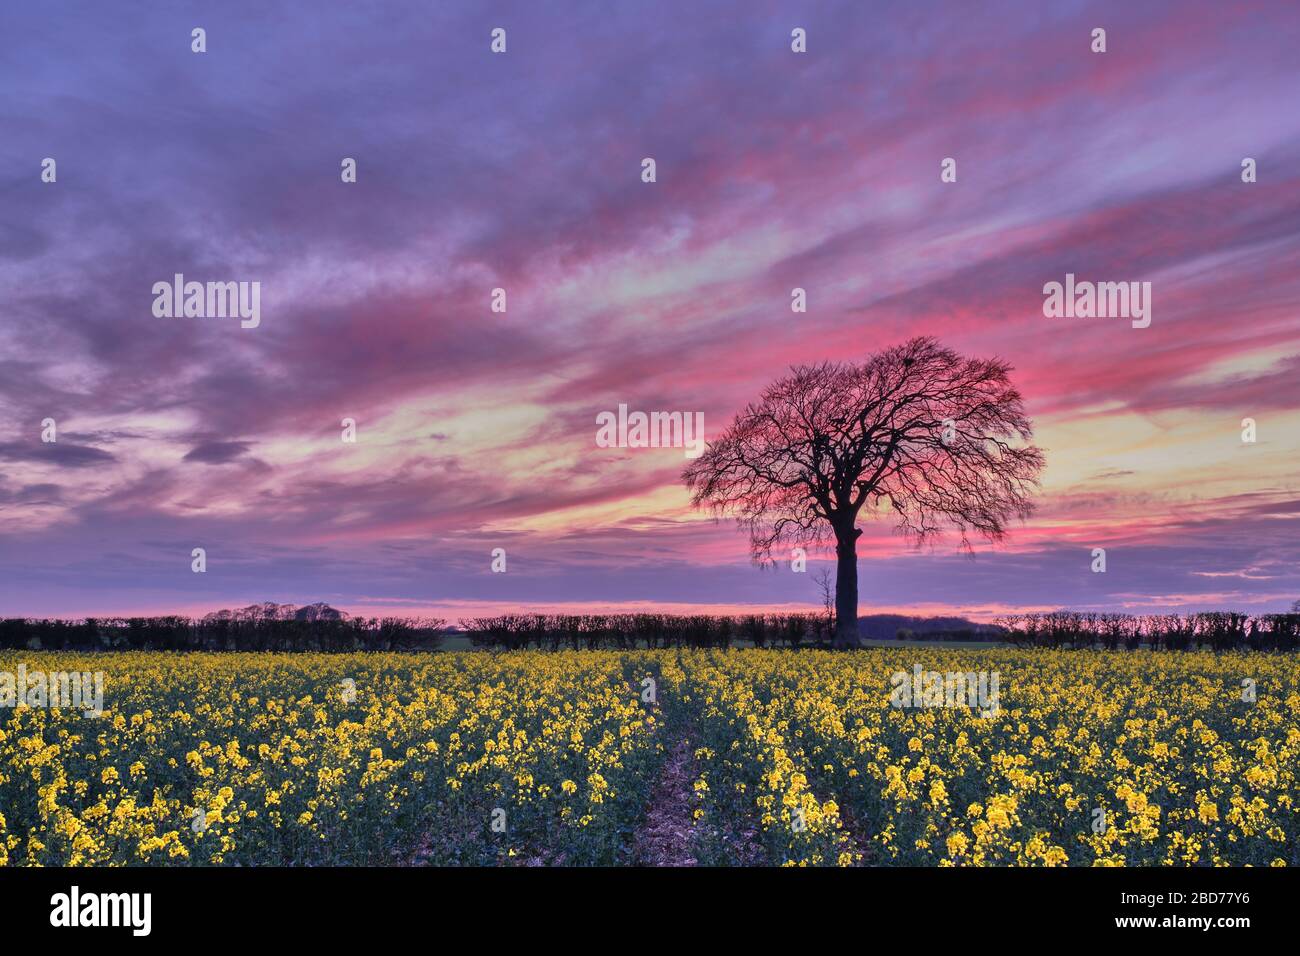 Vivid colourful sunset behind lone bare Beech tree Fagus sylvaticus with yellow flowering oilseed rape rapeseed Brassica napus Lincolnshire landscape Stock Photo